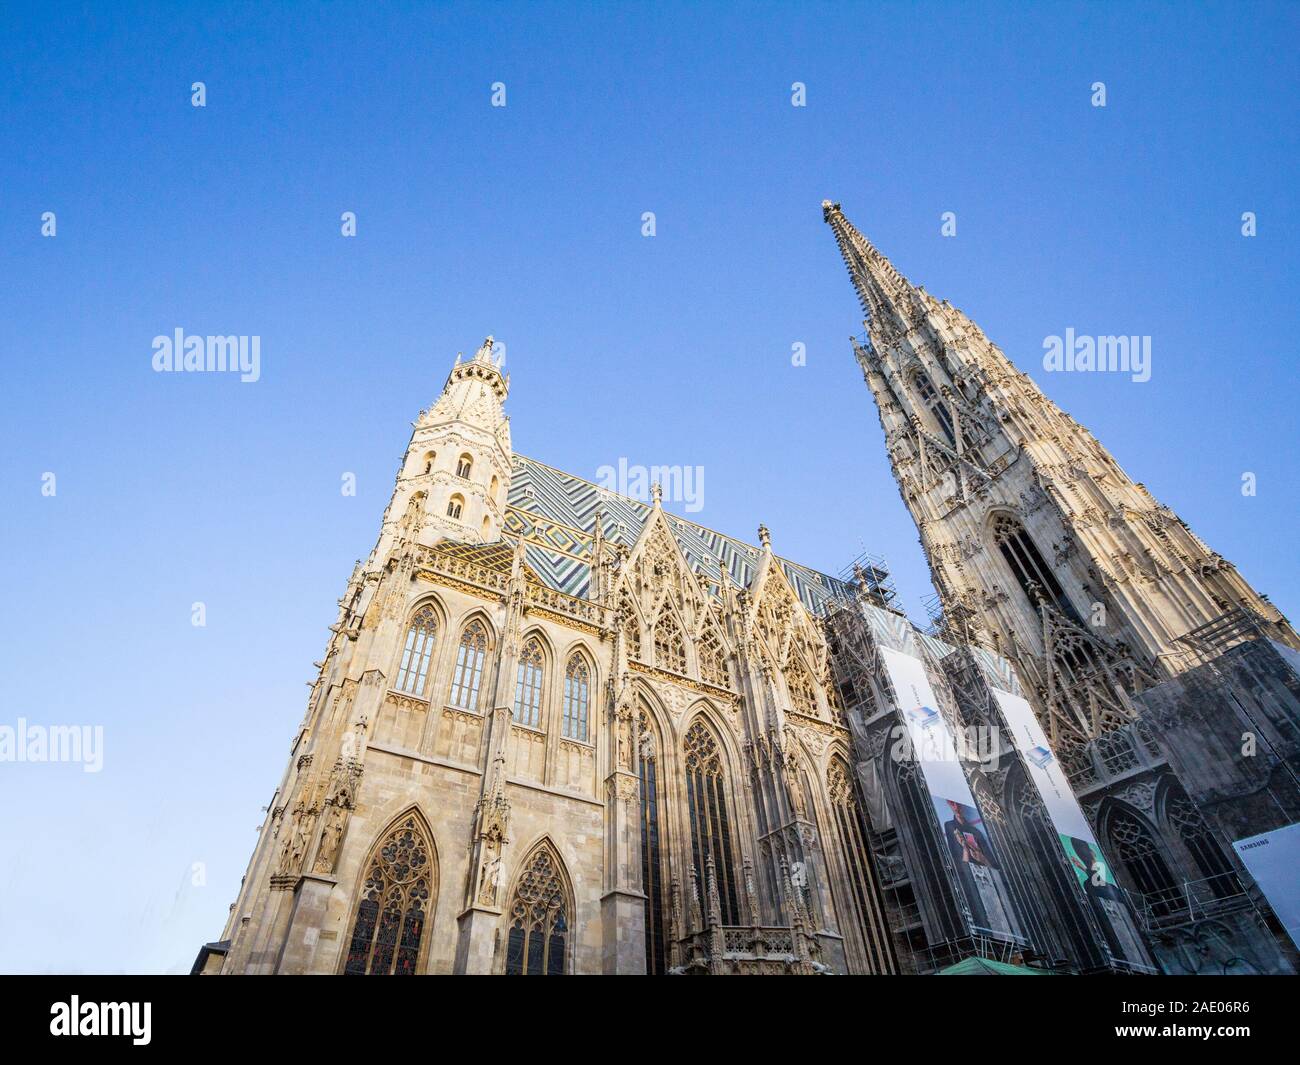 VIENNA, AUSTRIA - NOVEMBER 6, 2019: Domkirche St Stephan cathedral. Located on Stephansplatz, the Domkirche is the main catholic church of the city, a Stock Photo